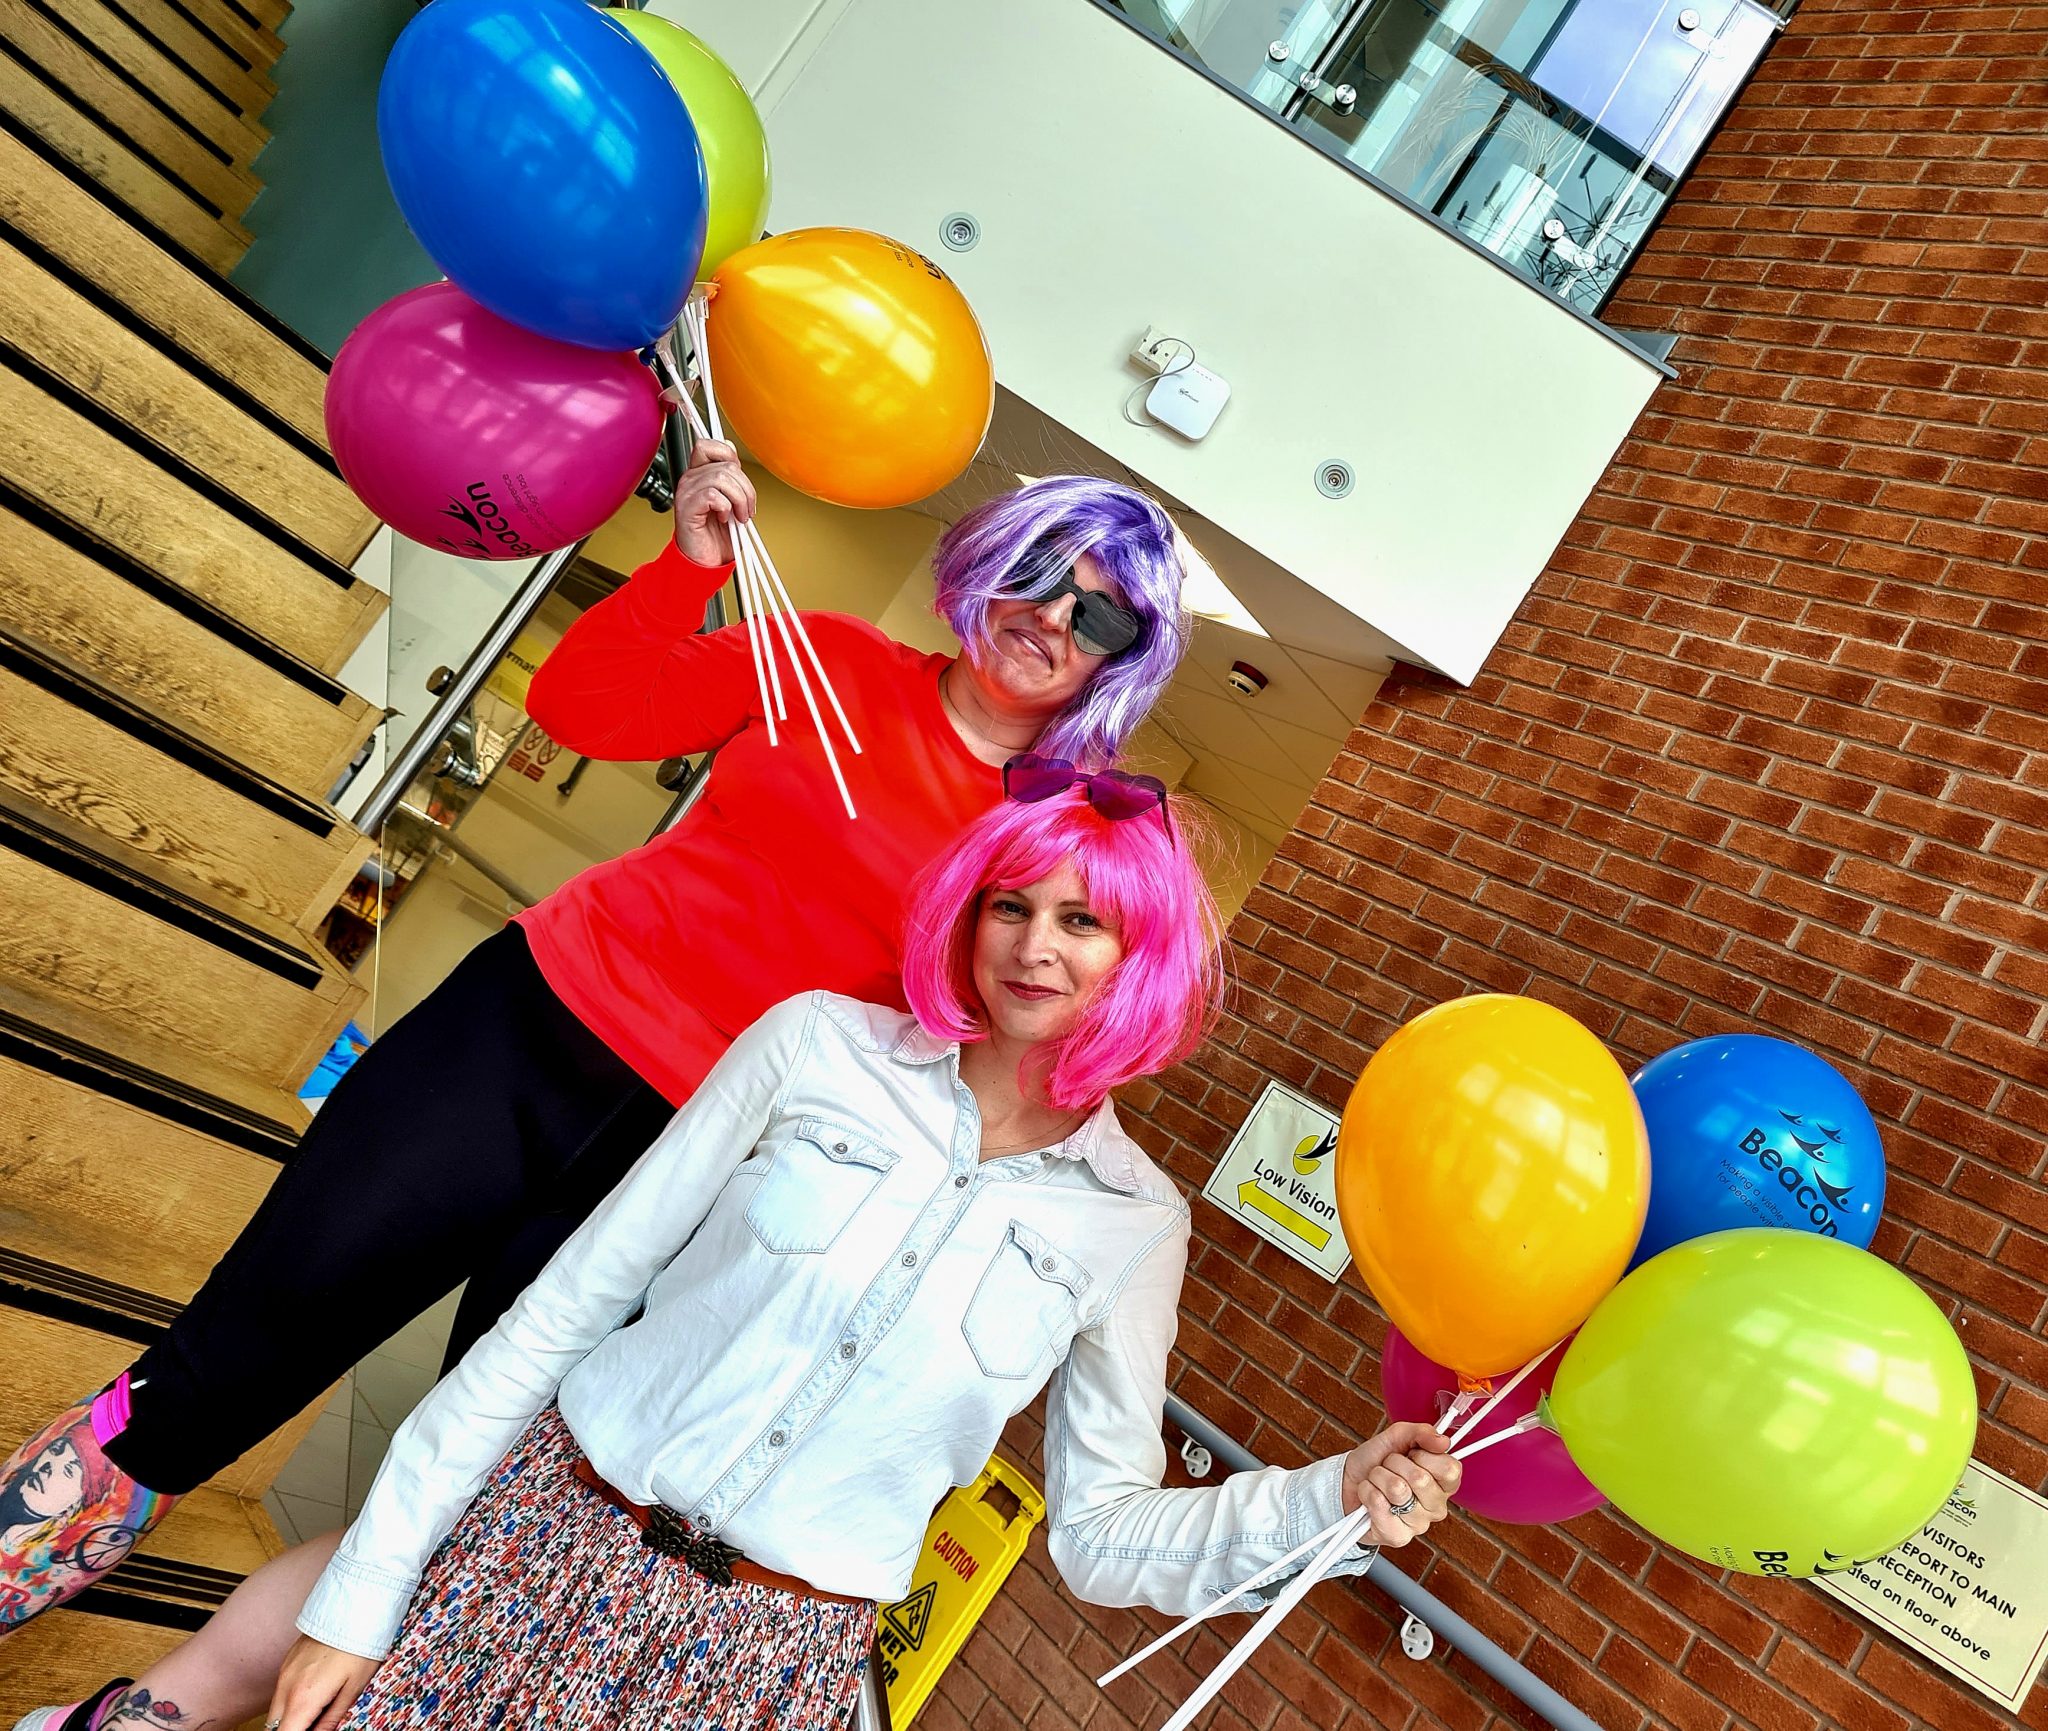 This image shows Mary and Sarah from Beacon stood in the reception area of our centre wearing brightly coloured clothes, wigs and balloons.